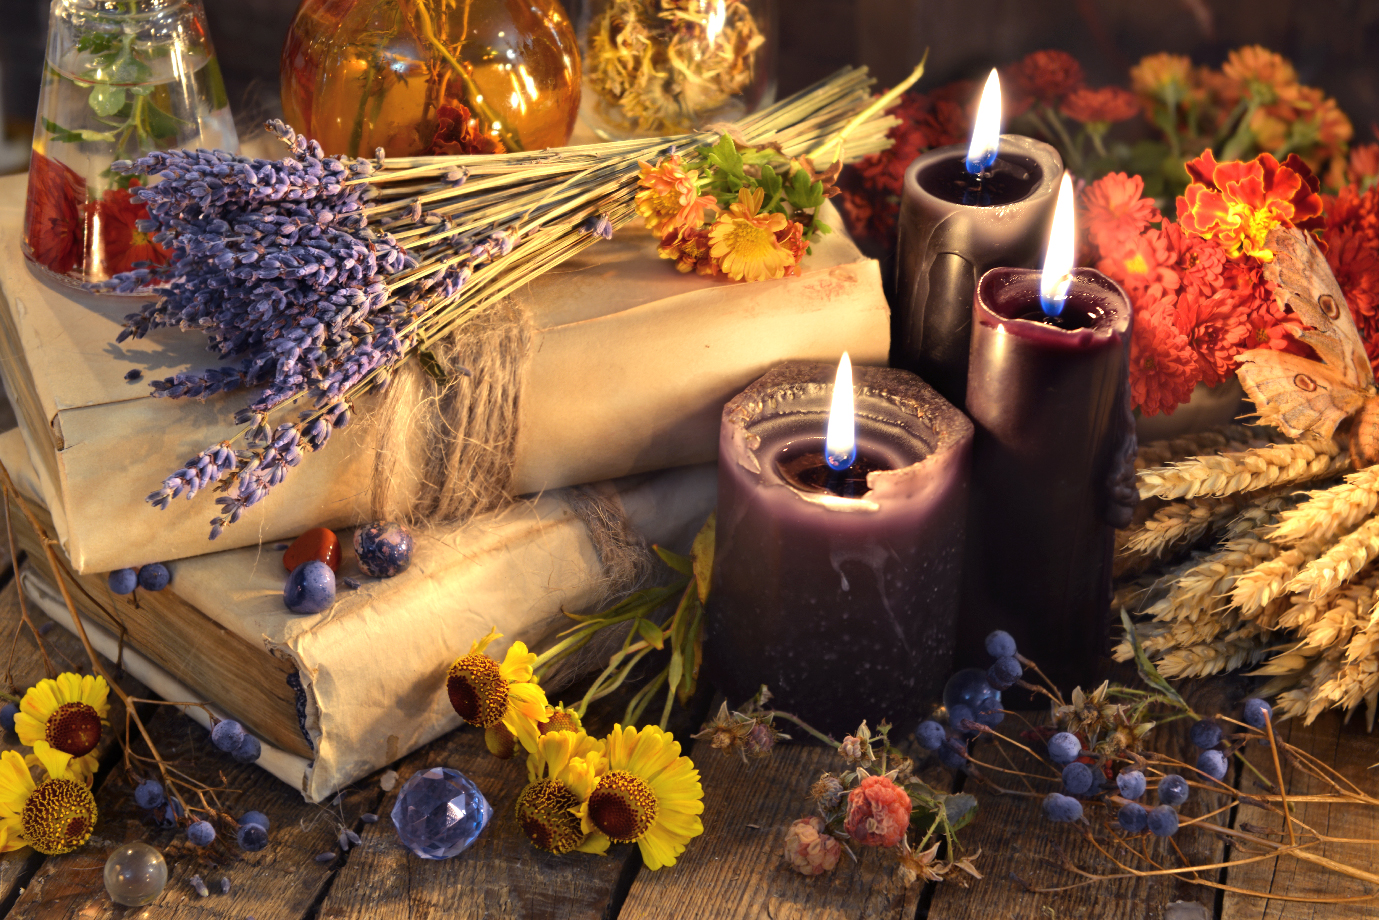 A scene depicting lit scented candles, dried flowers and essential oils